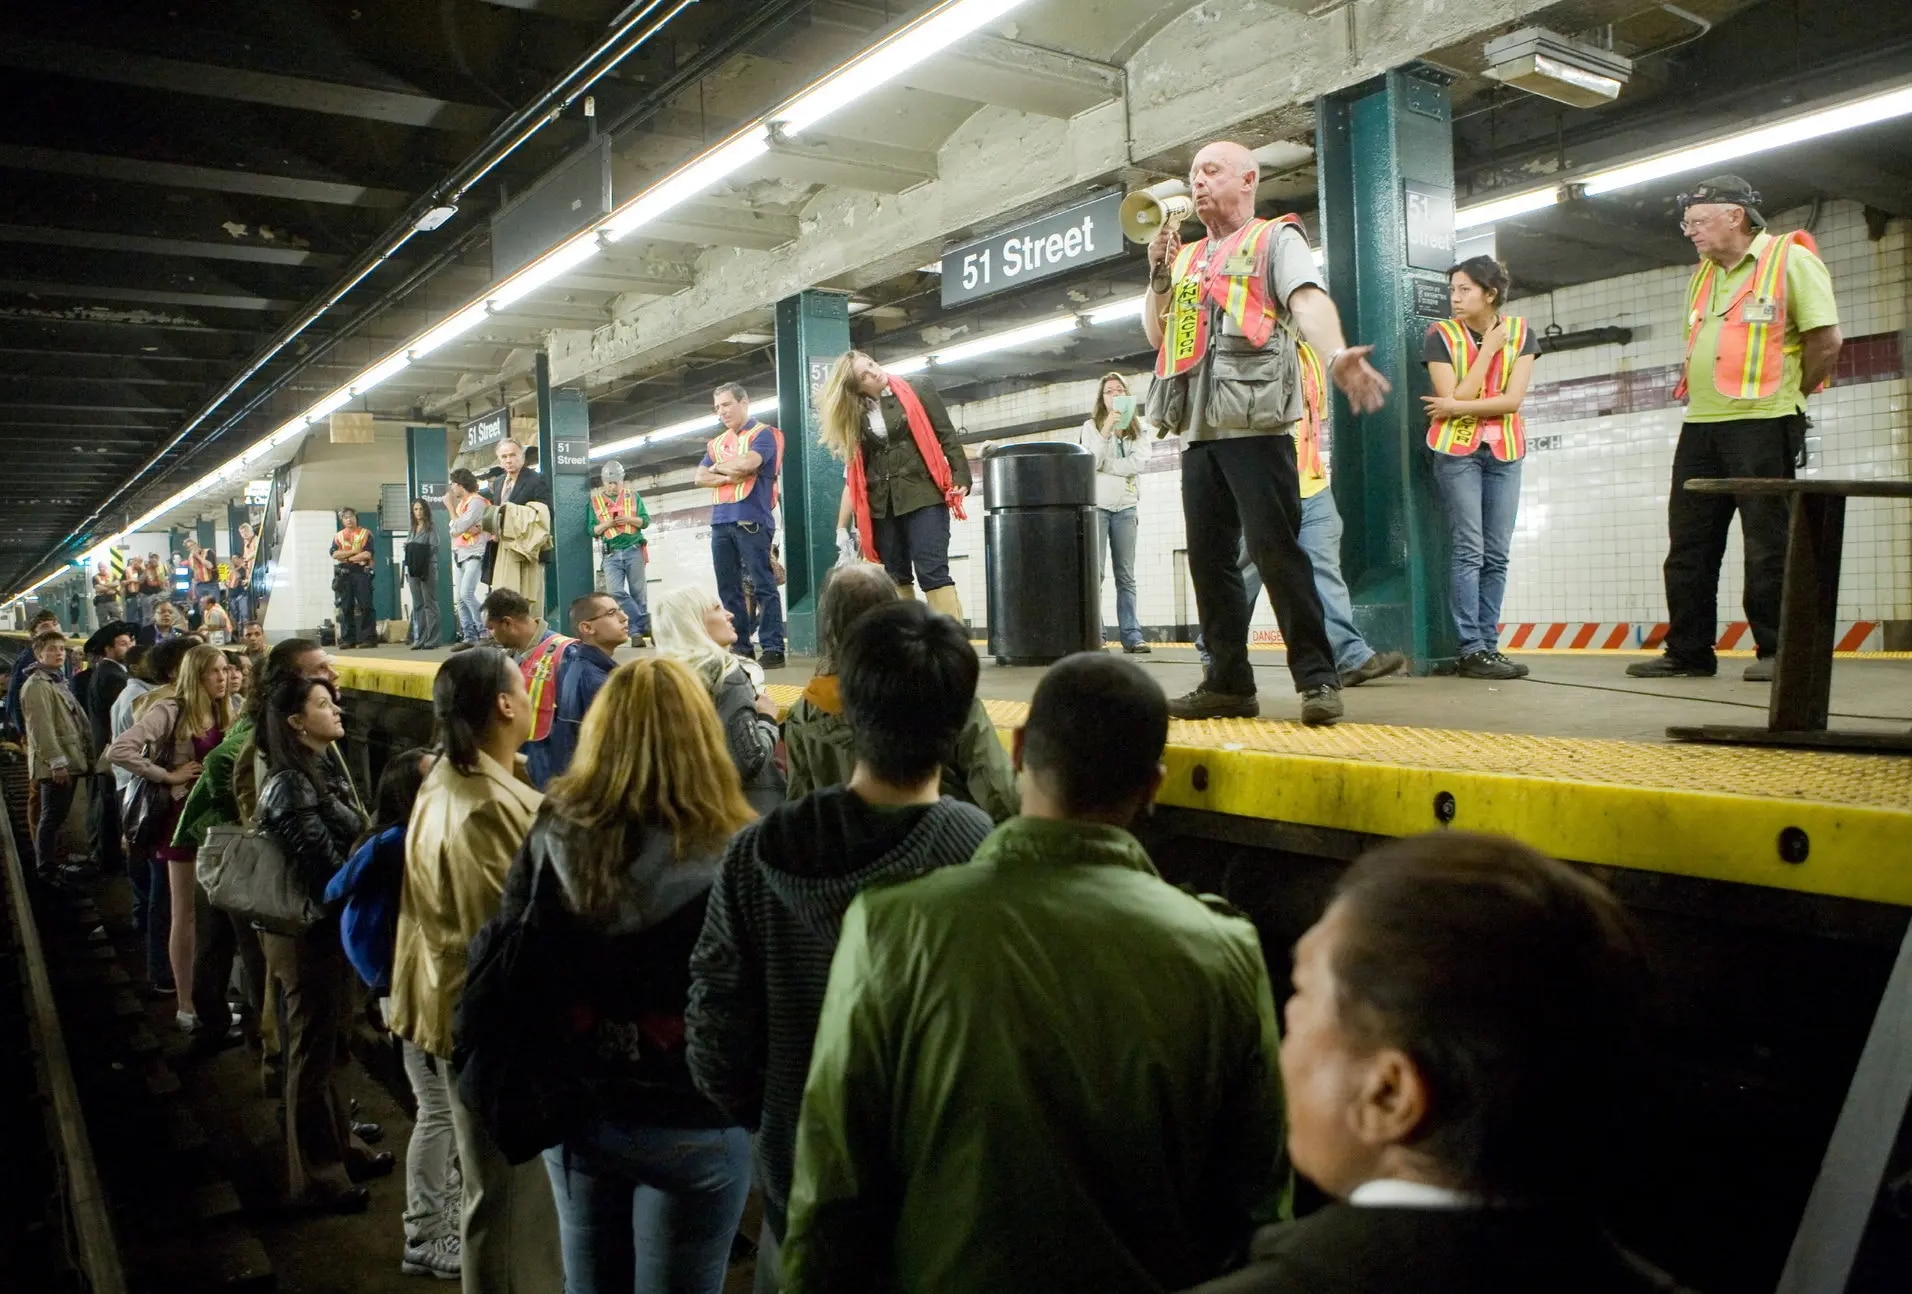 Film production members wearing safety vests are standing on a platform, one with a bullhorn, speaking to actors and extras who are standing in the train tracks